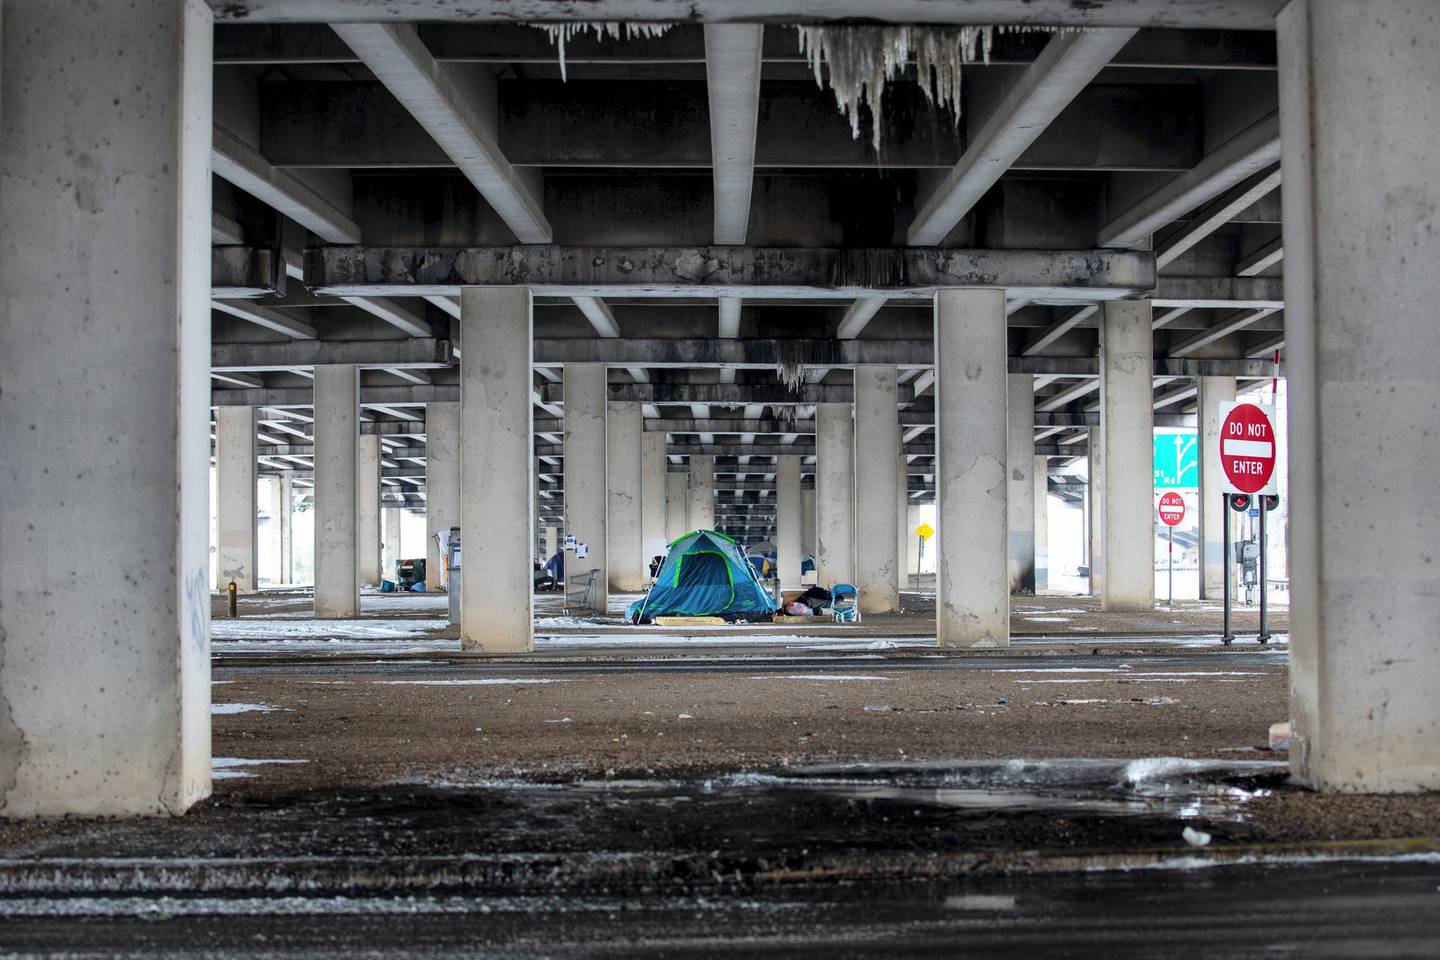 AUSTIN, TX - FEBRUARY 17, 2021: A homeless camp under a bridge on I-35 in Austin, Texas on February 17, 2021. Millions of Texans are still without water and electric as winter storms continue. (Photo by Montinique Monroe/Getty Images)